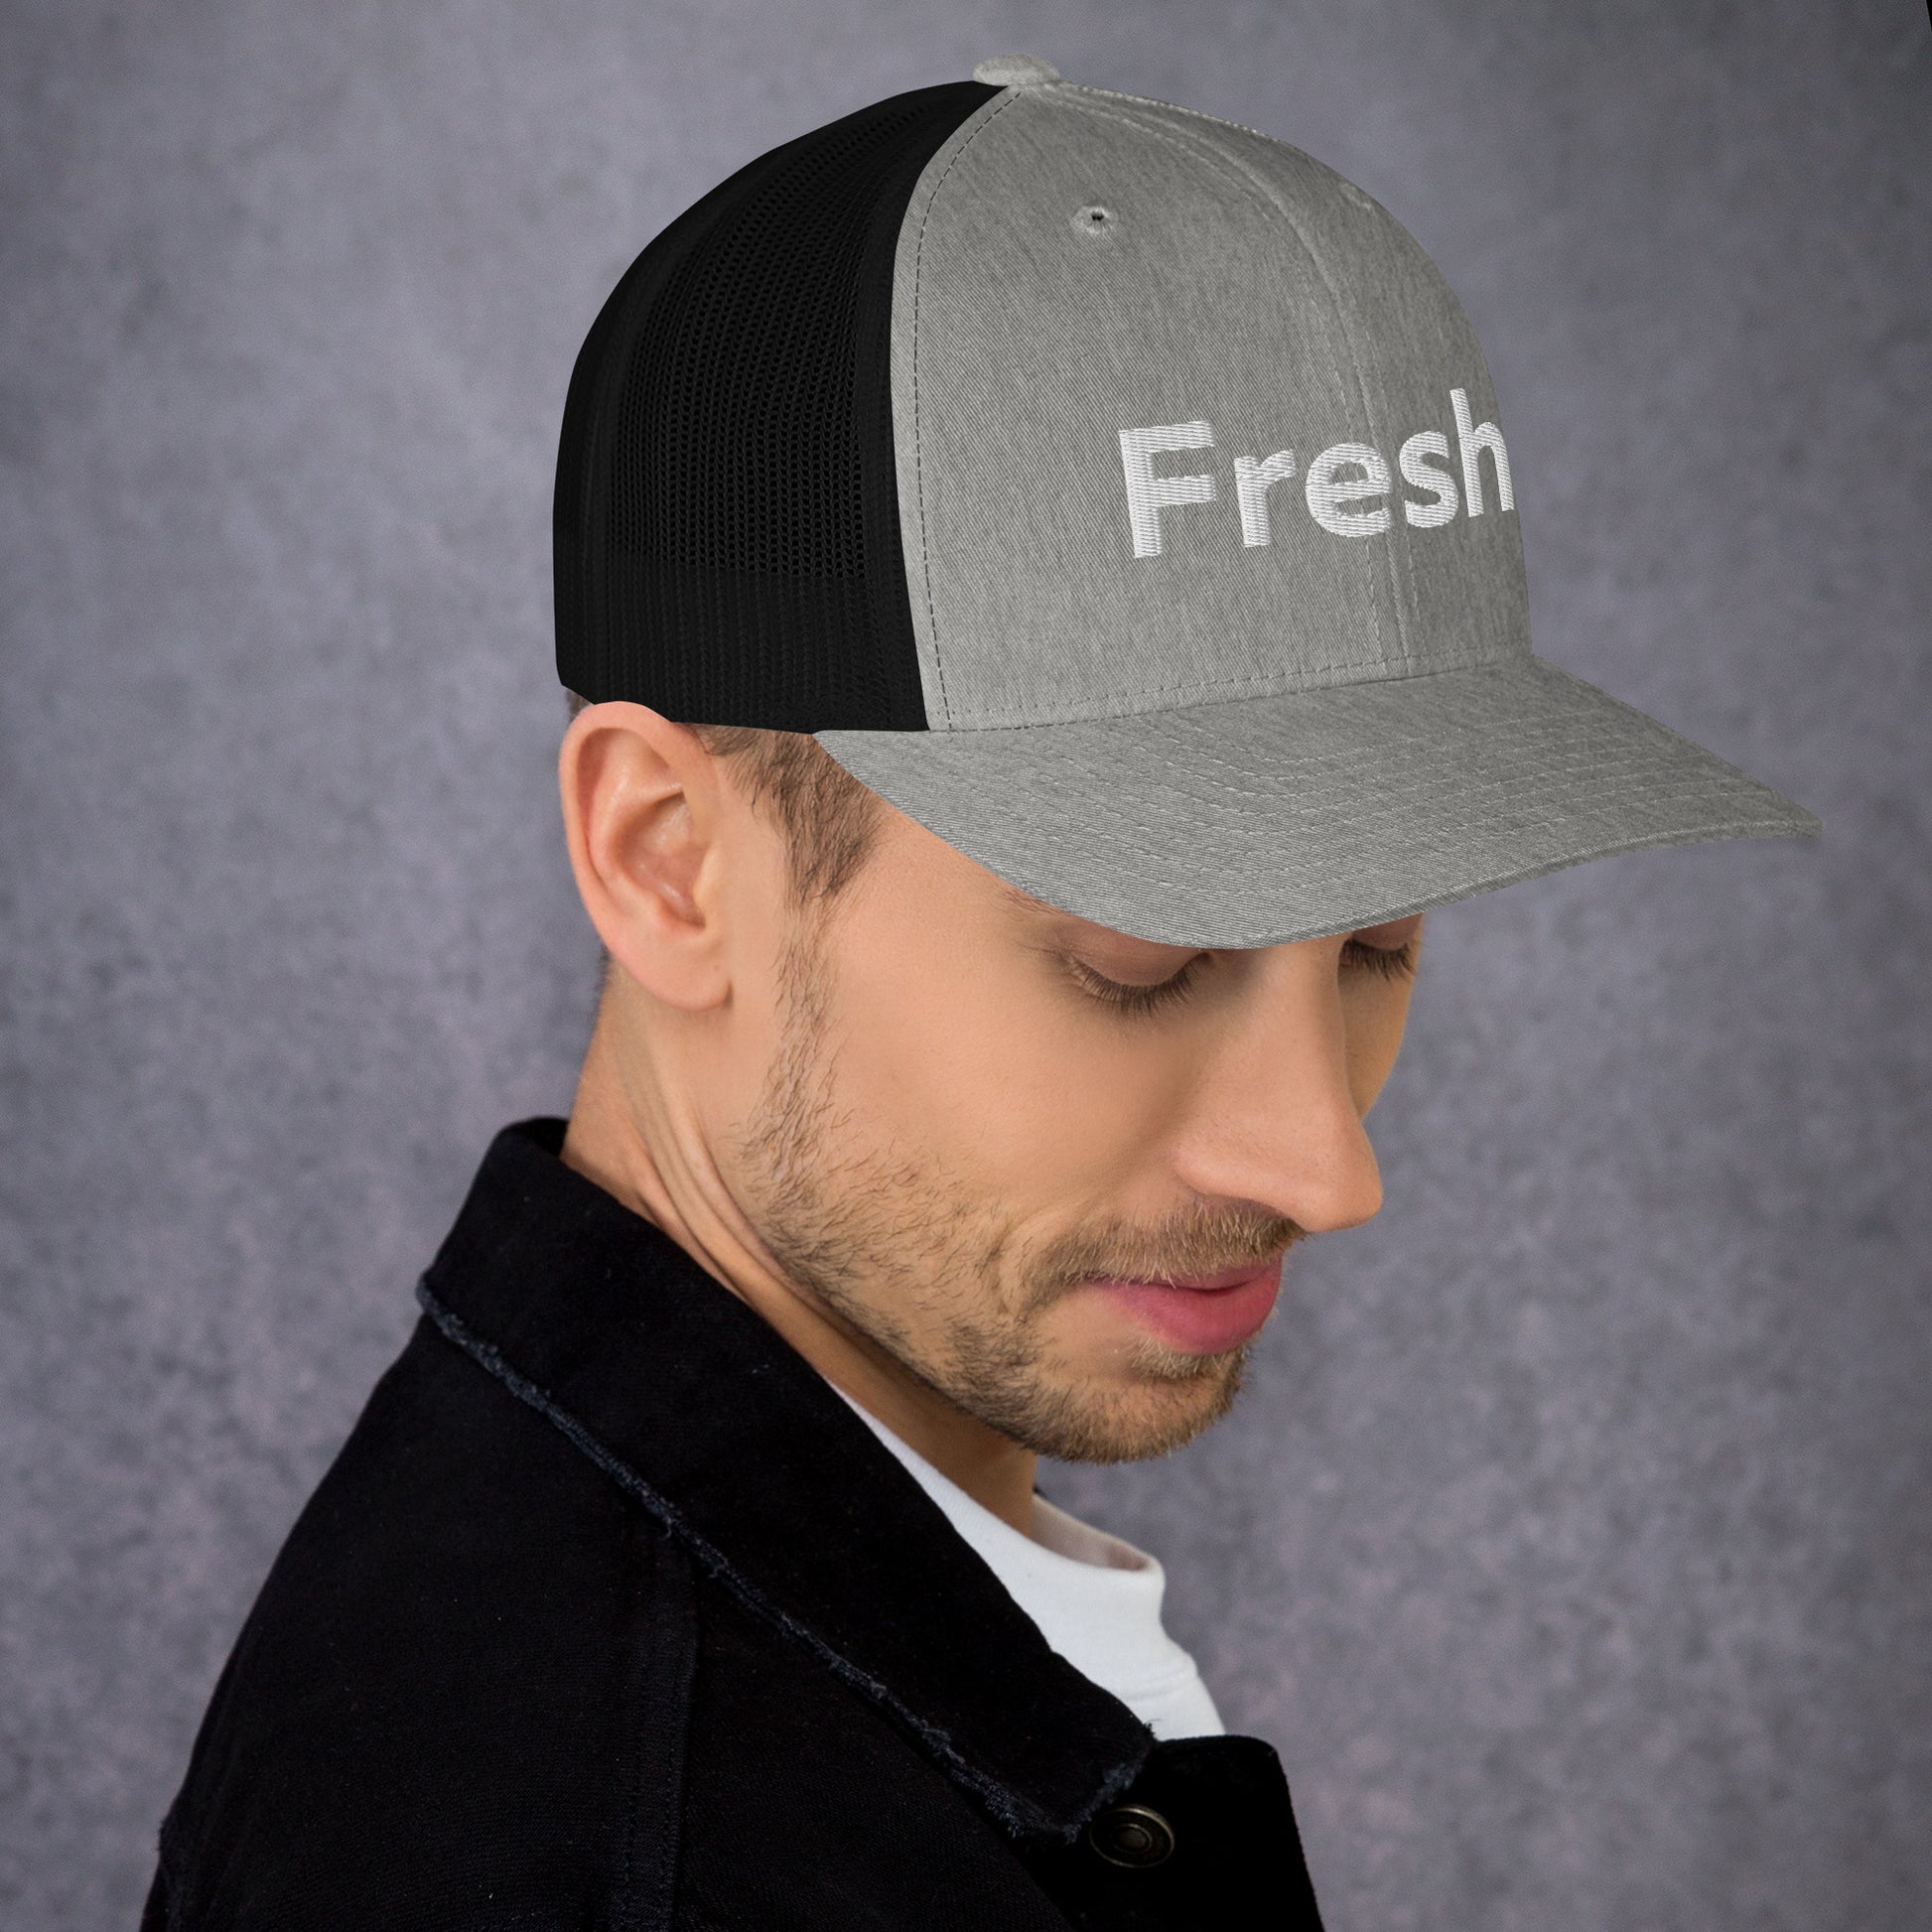 Looking for a hat that combines style and comfort? Look no further than the Fresh Hat! Color: Heather and Black